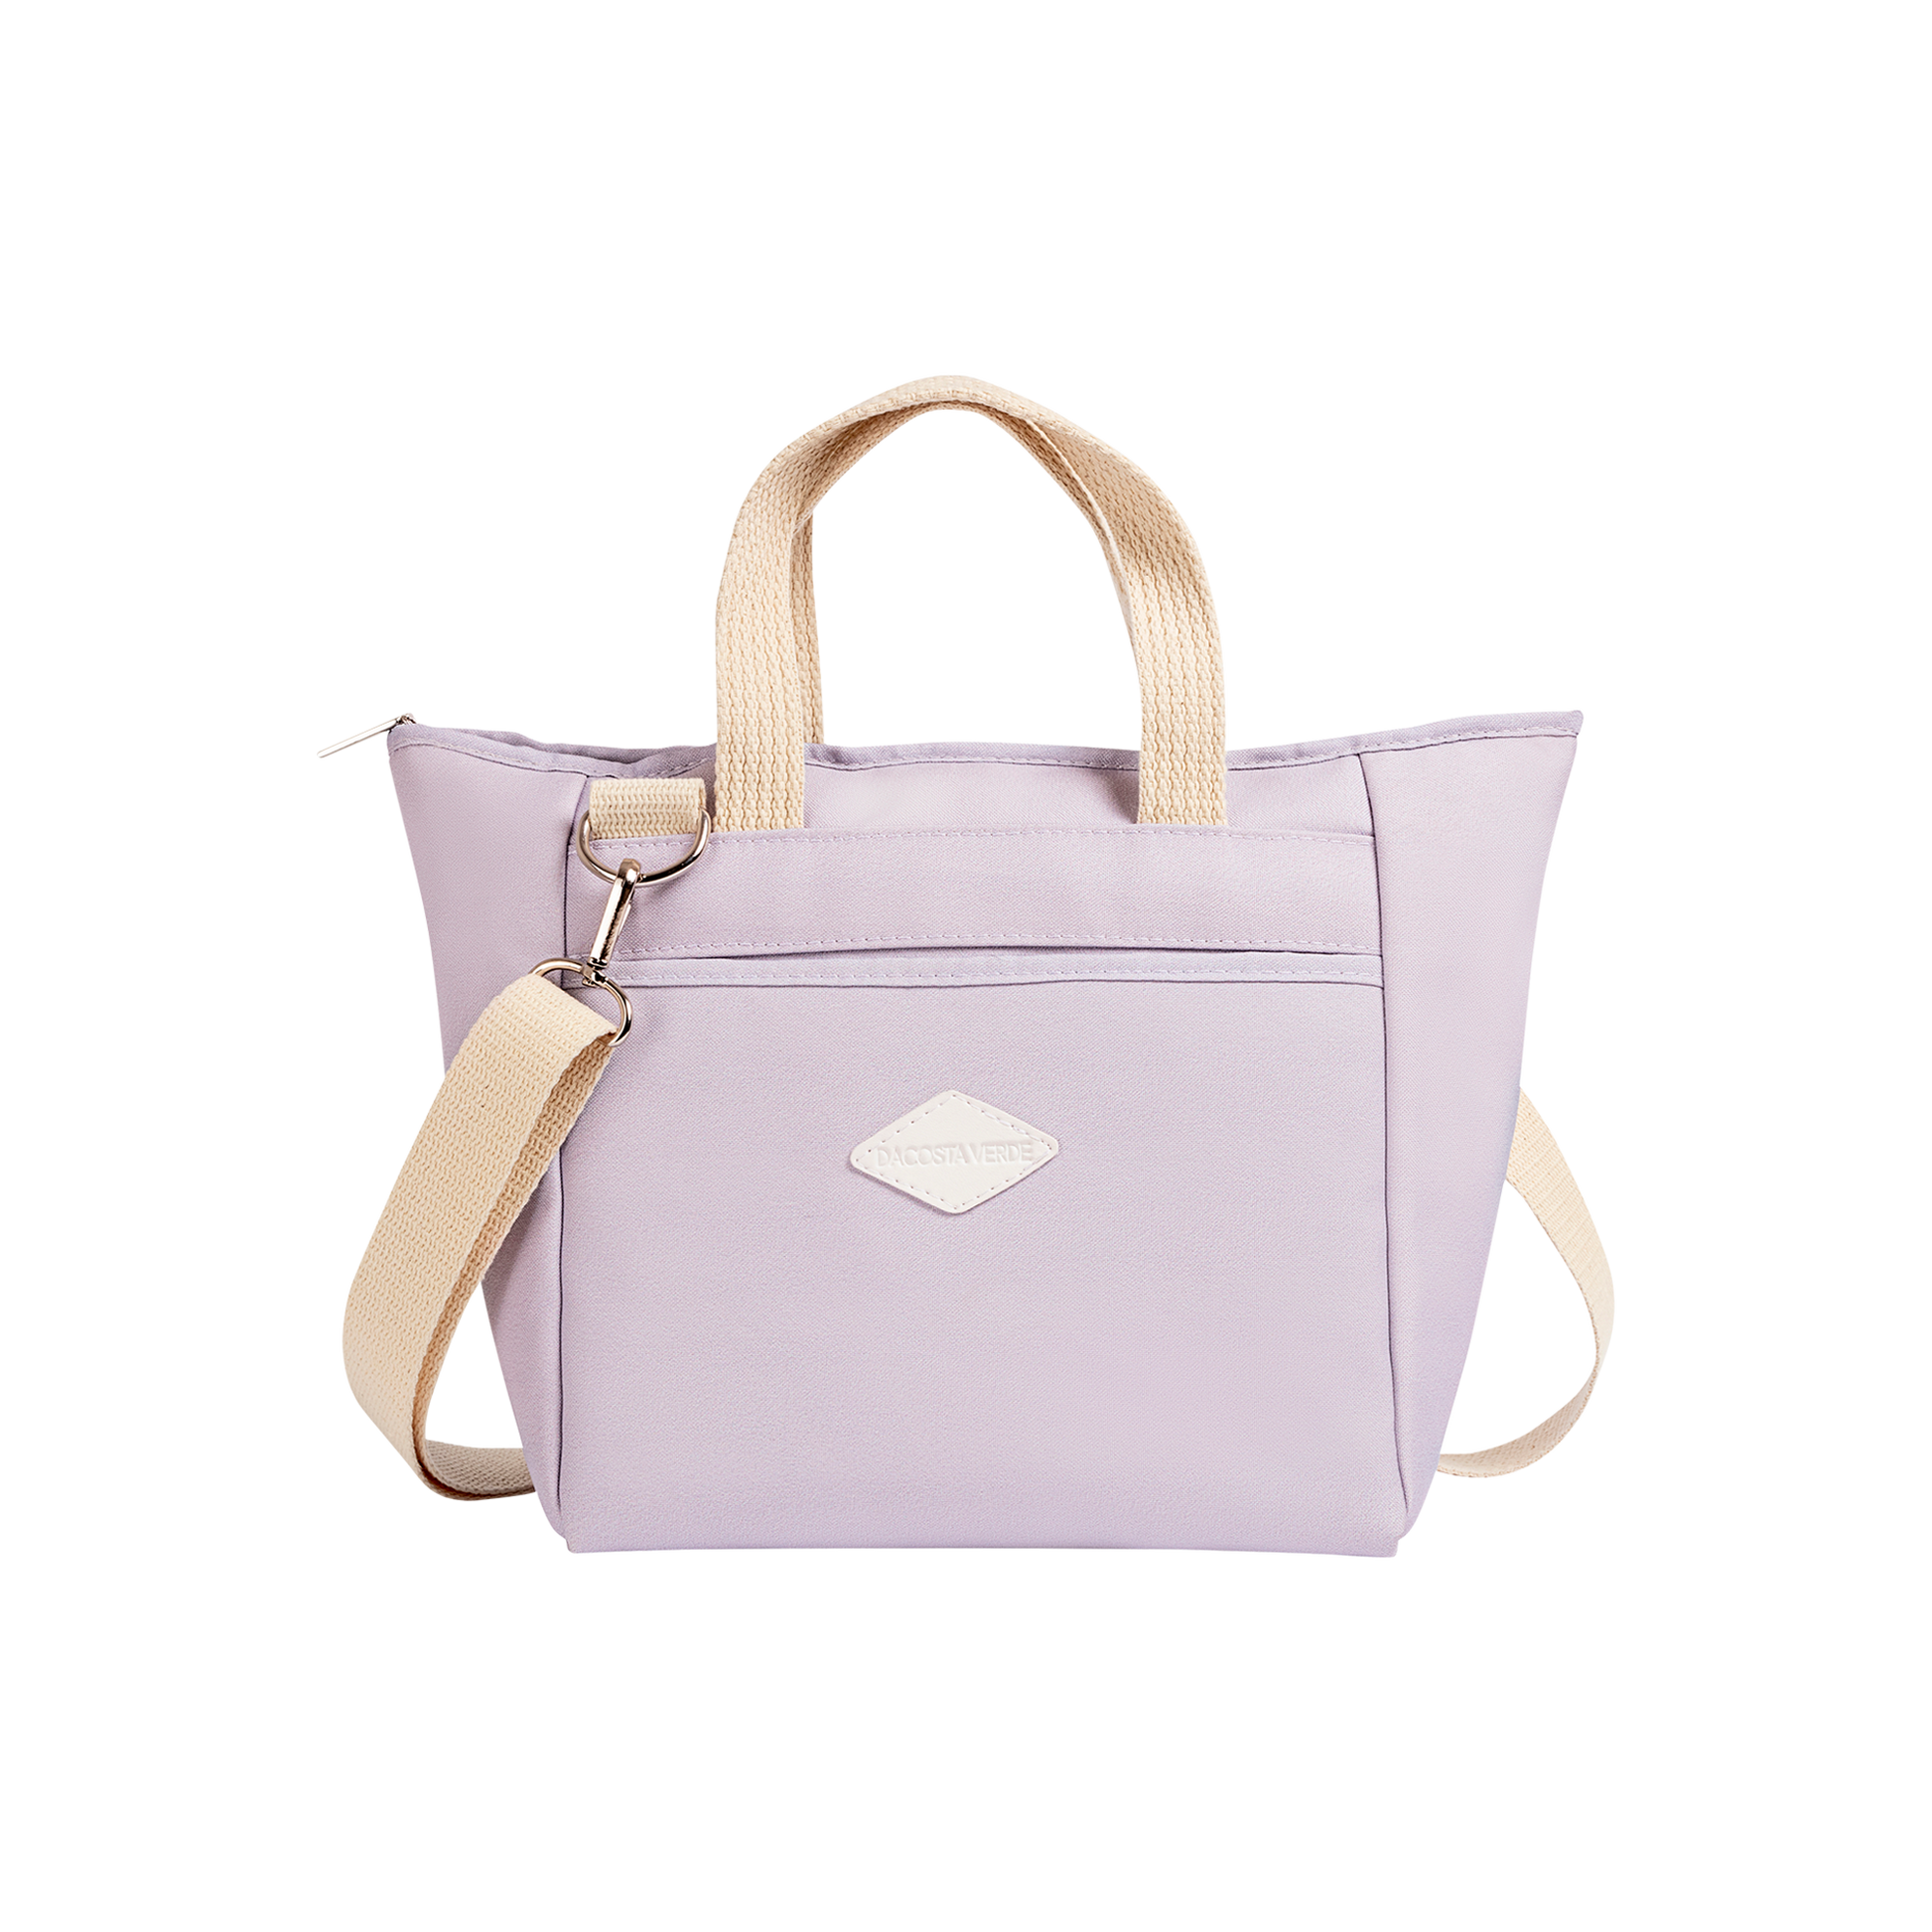 Lunch Tote Dreamy Lilac